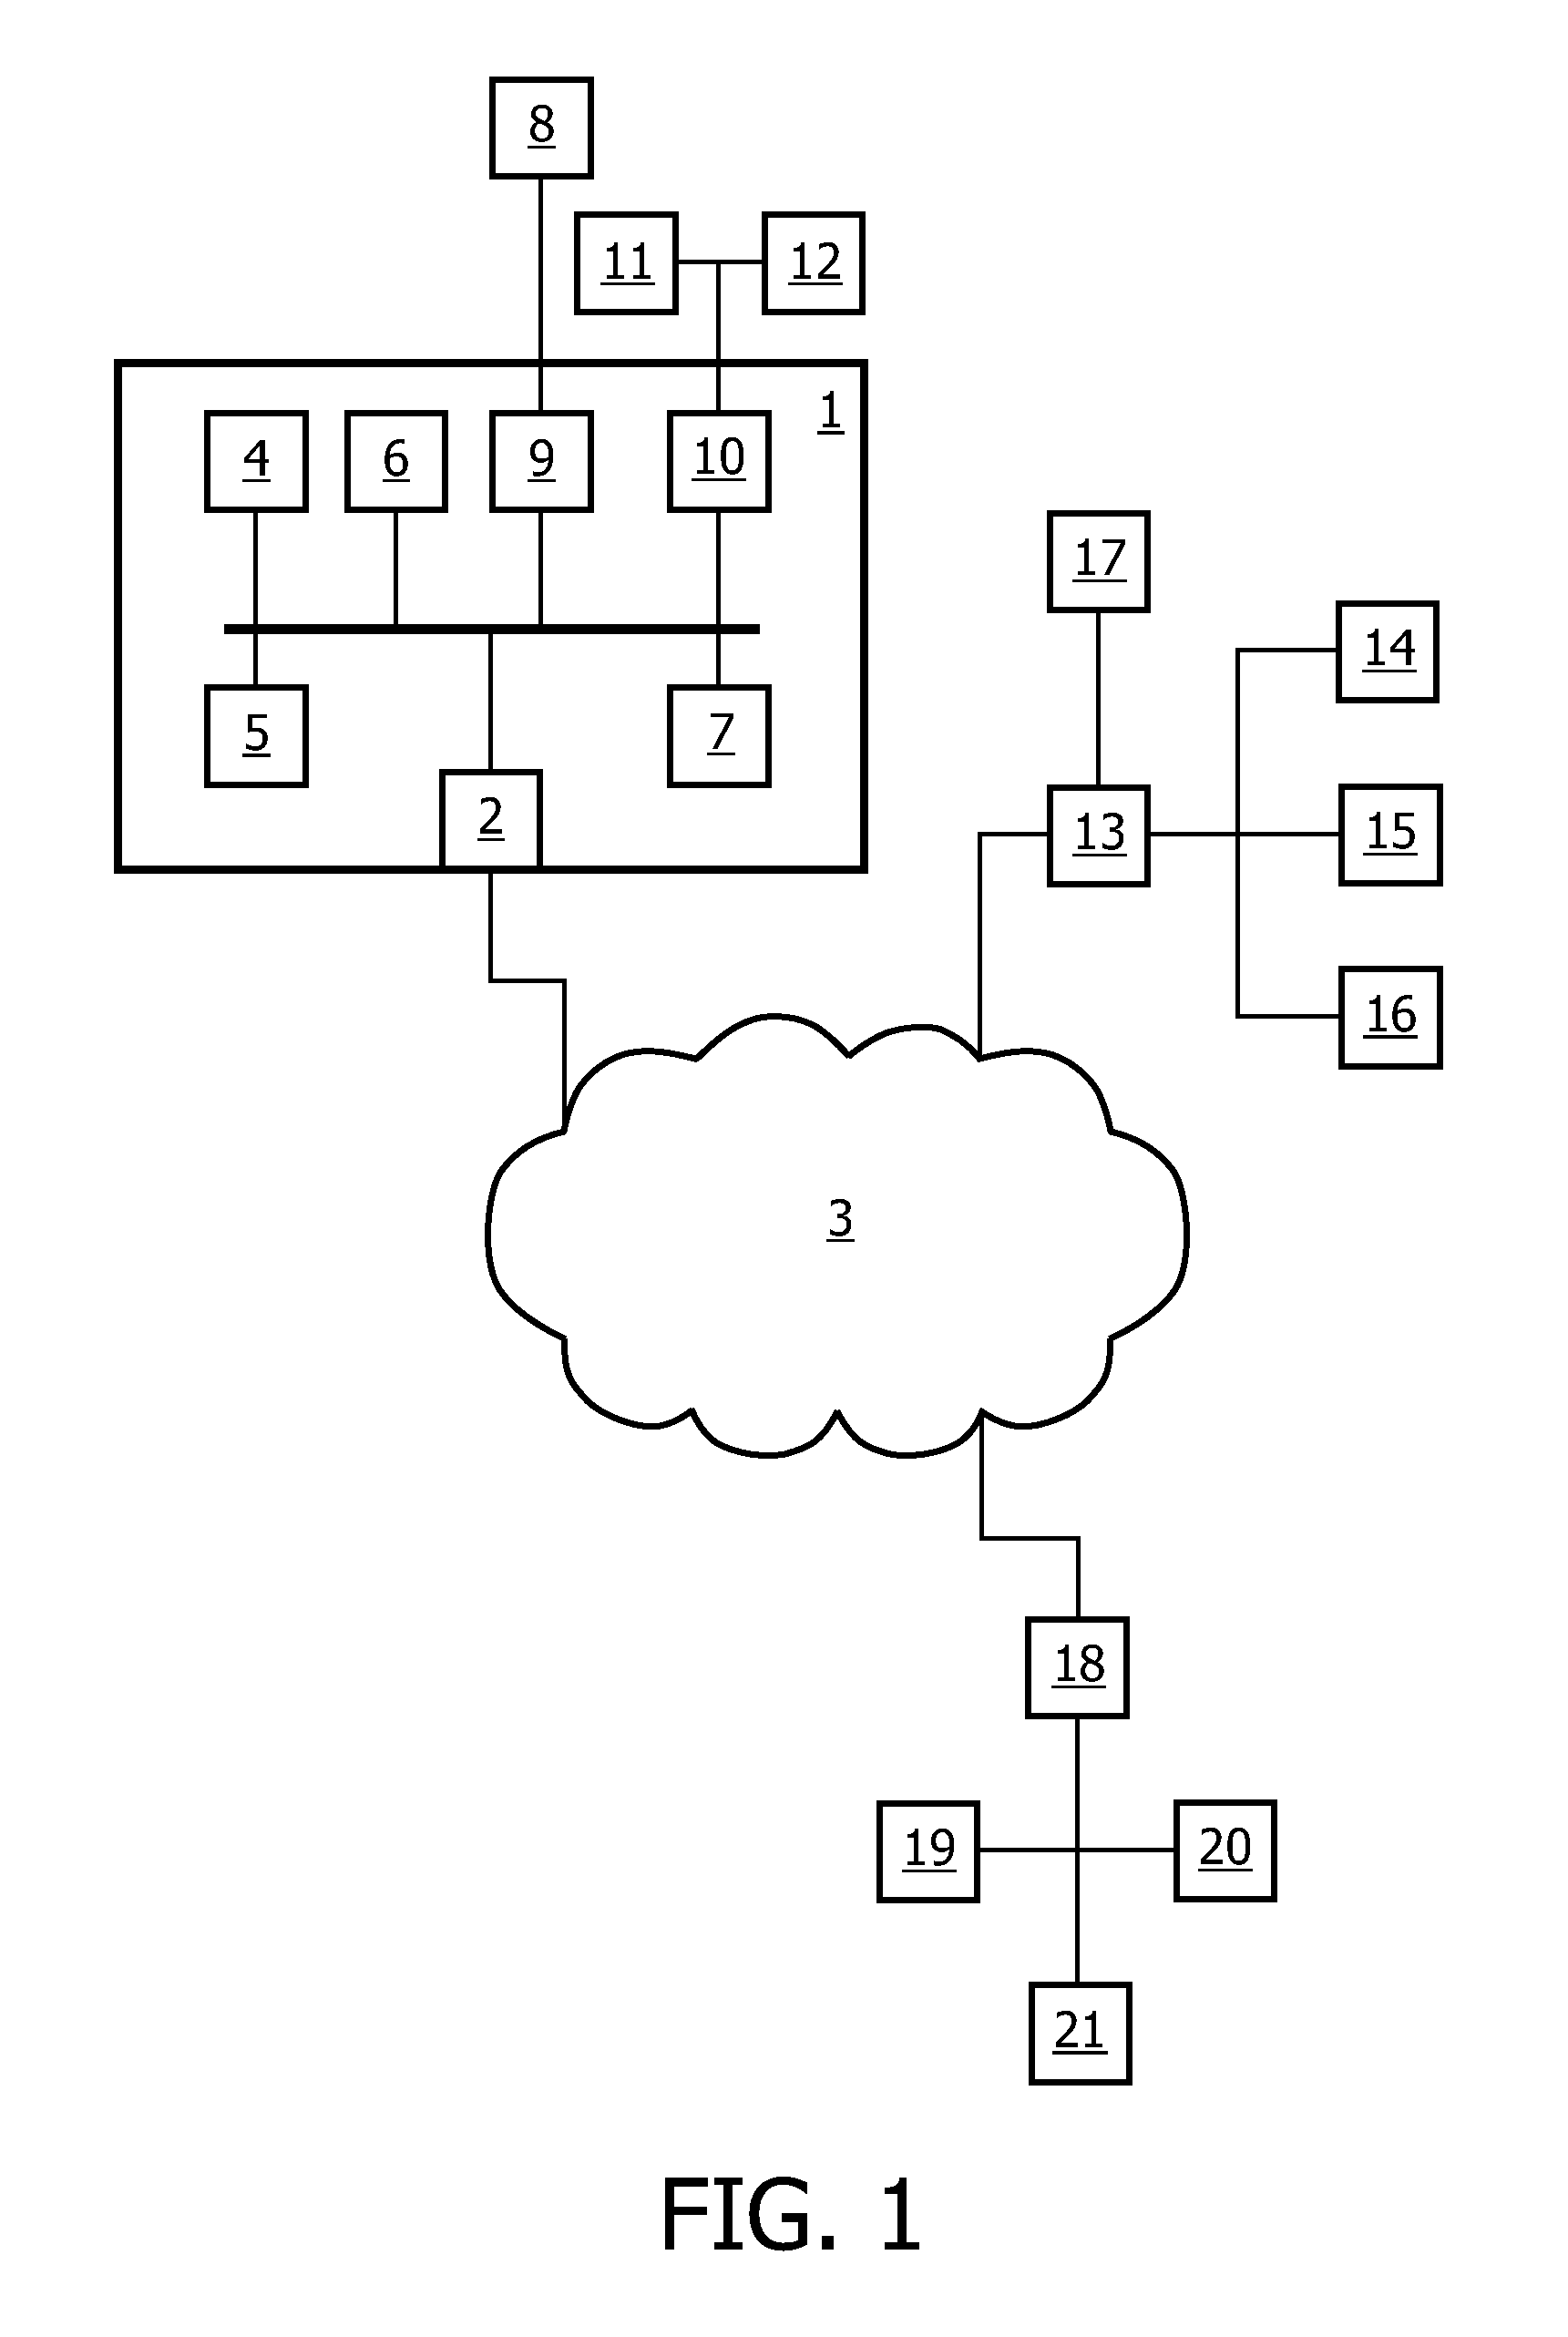 Method of controlling communications between at least two users of a communication system